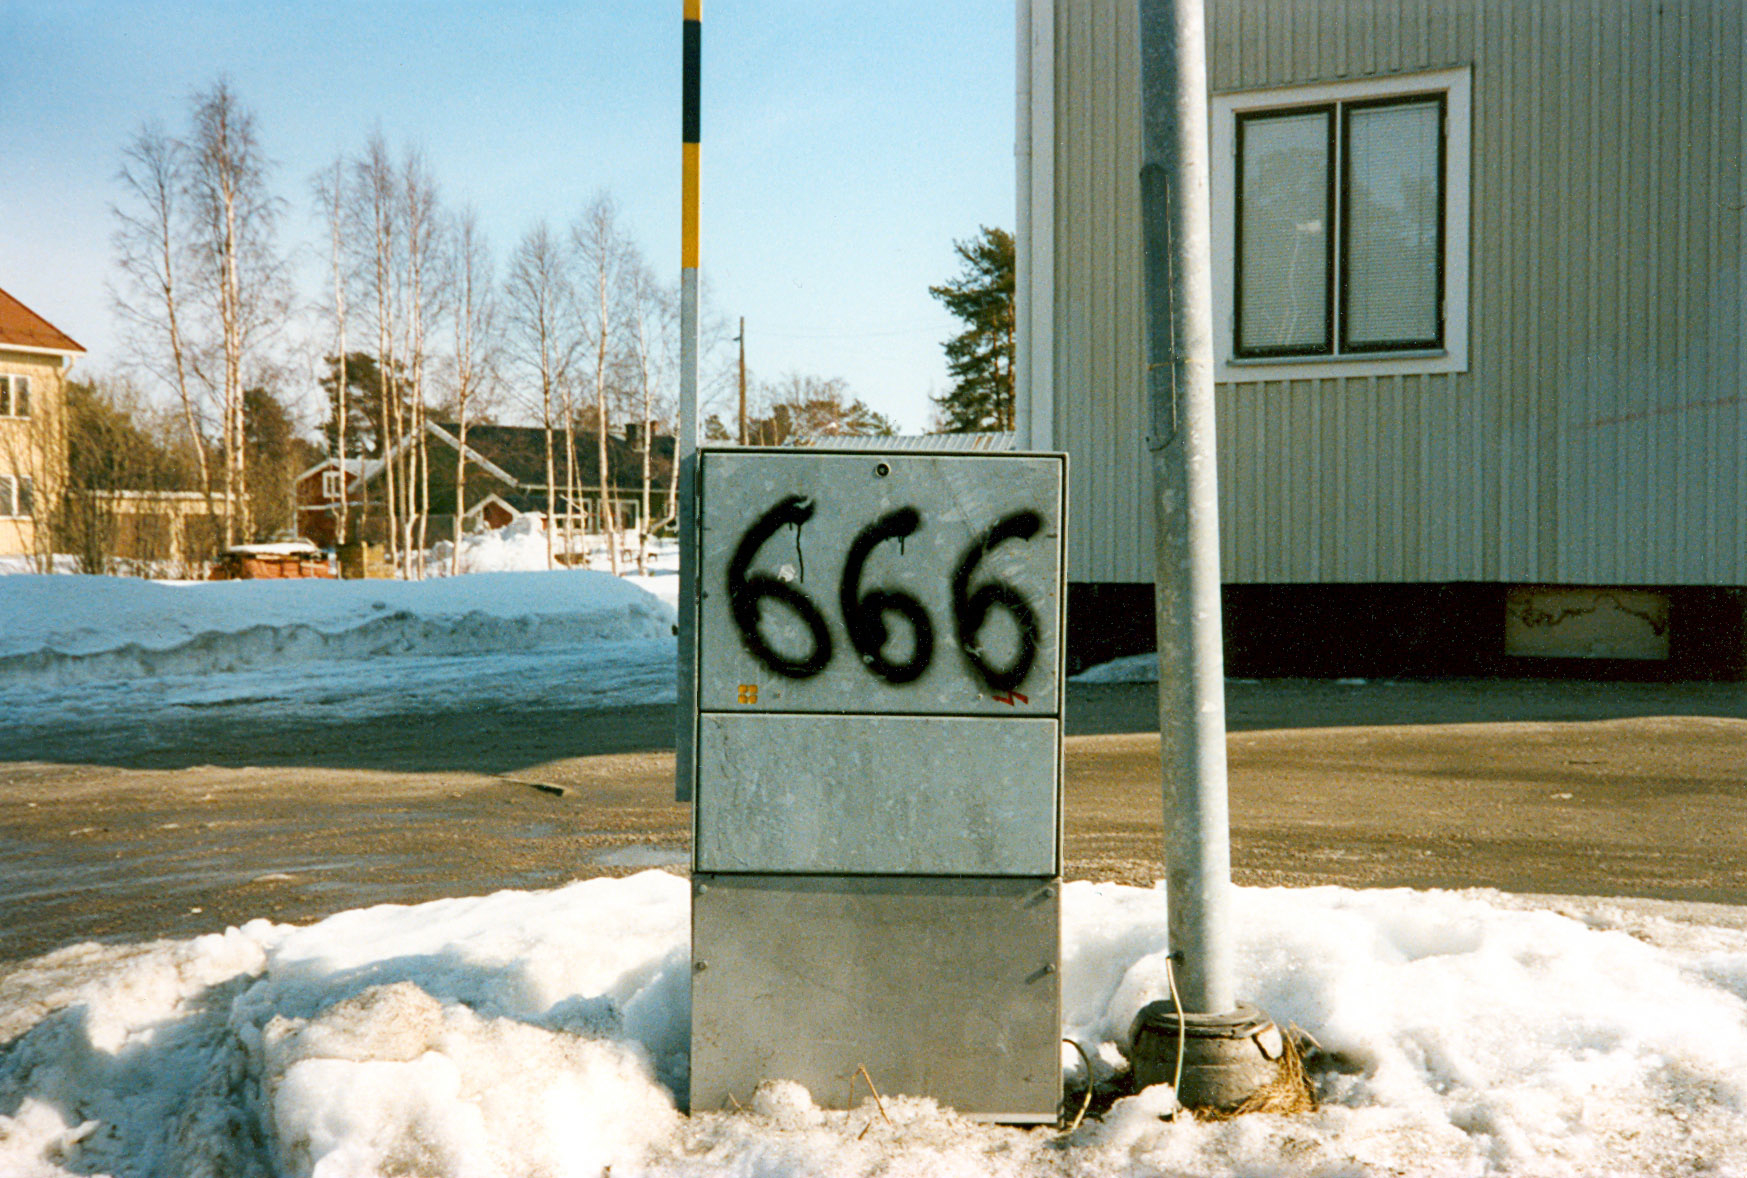 graffiti that reads 666 sitting in the snow